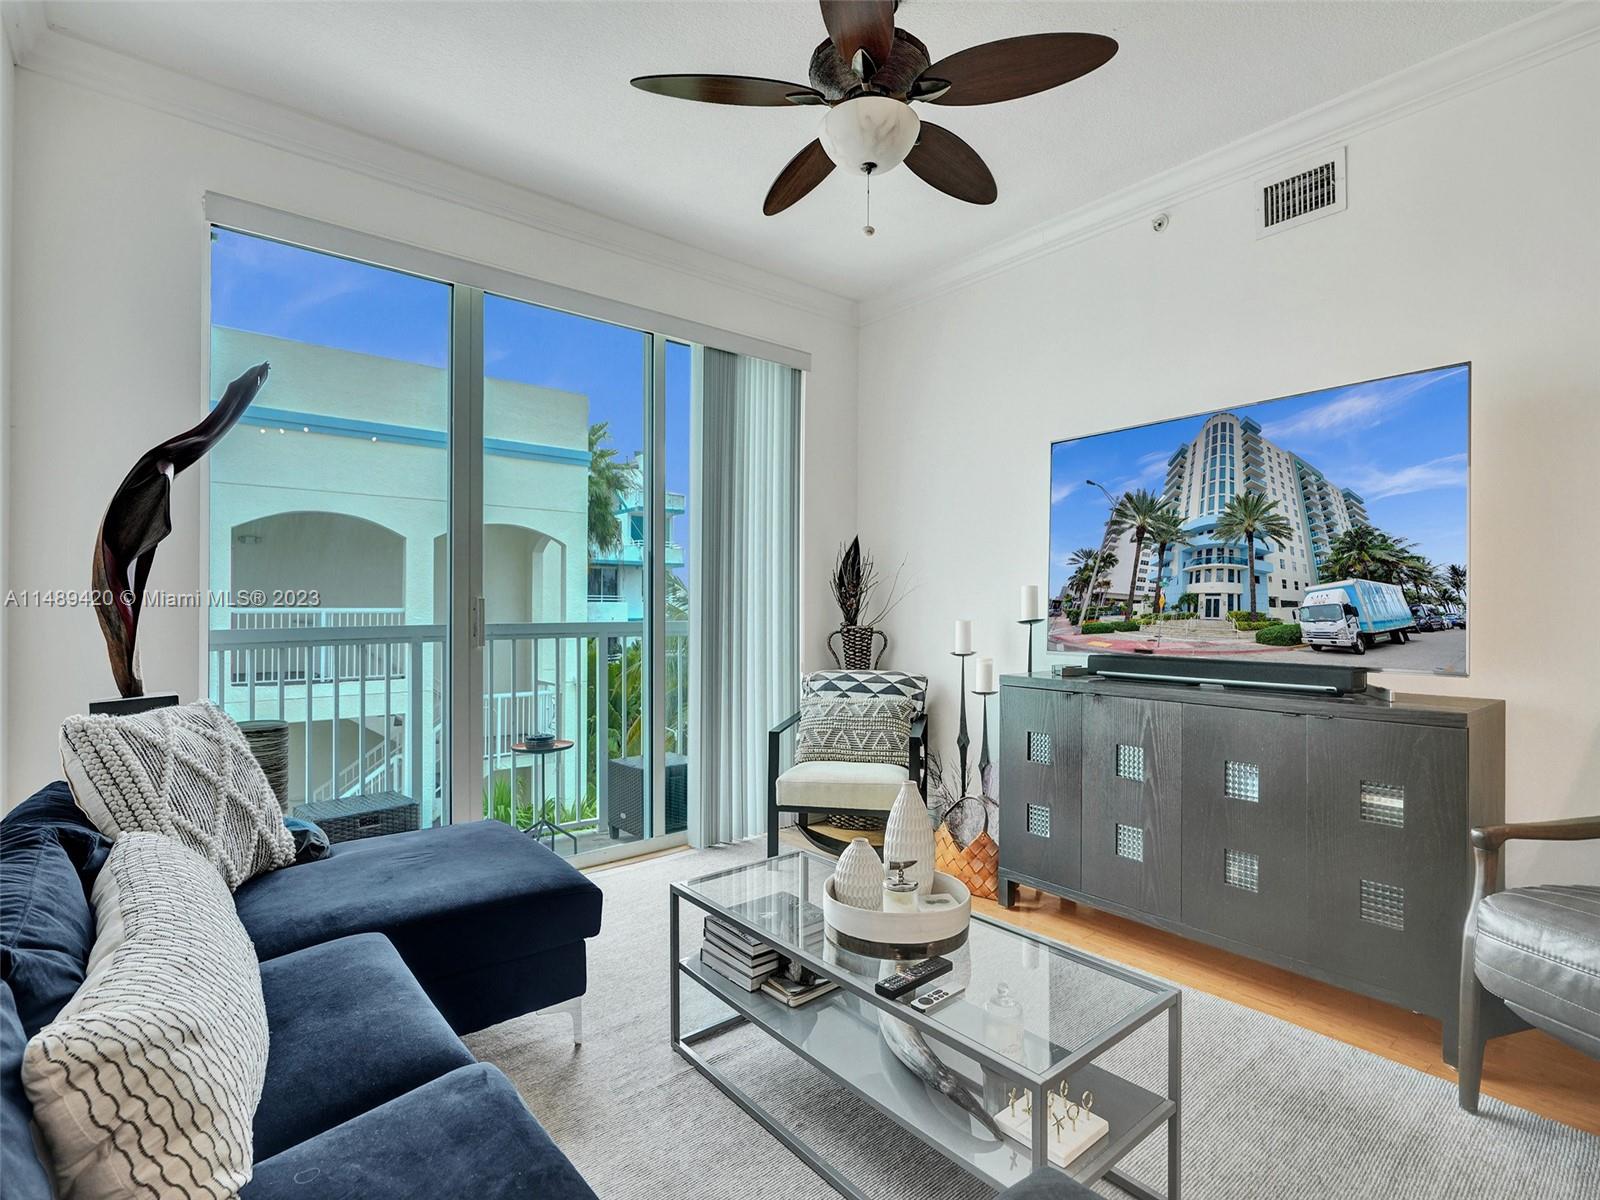 Just Listed in Surfside: 2-bedroom, 2-bathroom condo at the Waverly! Nearly 1000 SQFT of refined living space with 10-ft high ceilings, large closets, and updated appliances including washer/dryer. Enjoy sunset pool views from your balcony & benefit from covered, gated, and assigned parking in this boutique building! Exclusive access to the sister building across the street which offers beach access, an oceanfront pool, gym, and game room. Can be sold furnished, fully reserved building & can be rented 2x a year! Building has new elevator and all assessments have been paid by seller! NO airbnb allowed and dog-friendly!